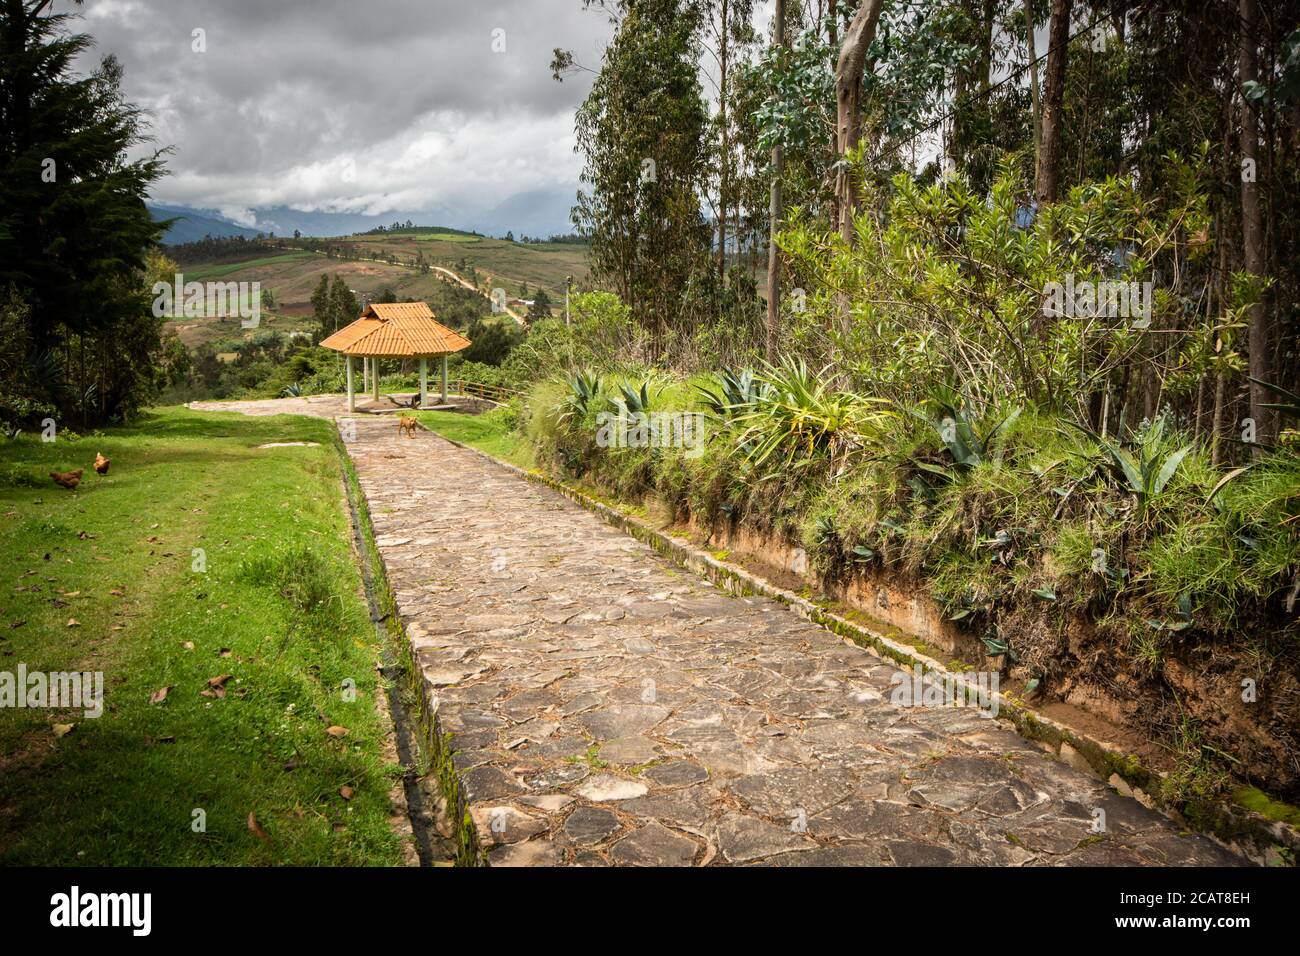 Scene from the picturesque mountain village of Huancas near Chachapoyas in Amazonas, northern Peru Stock Photo